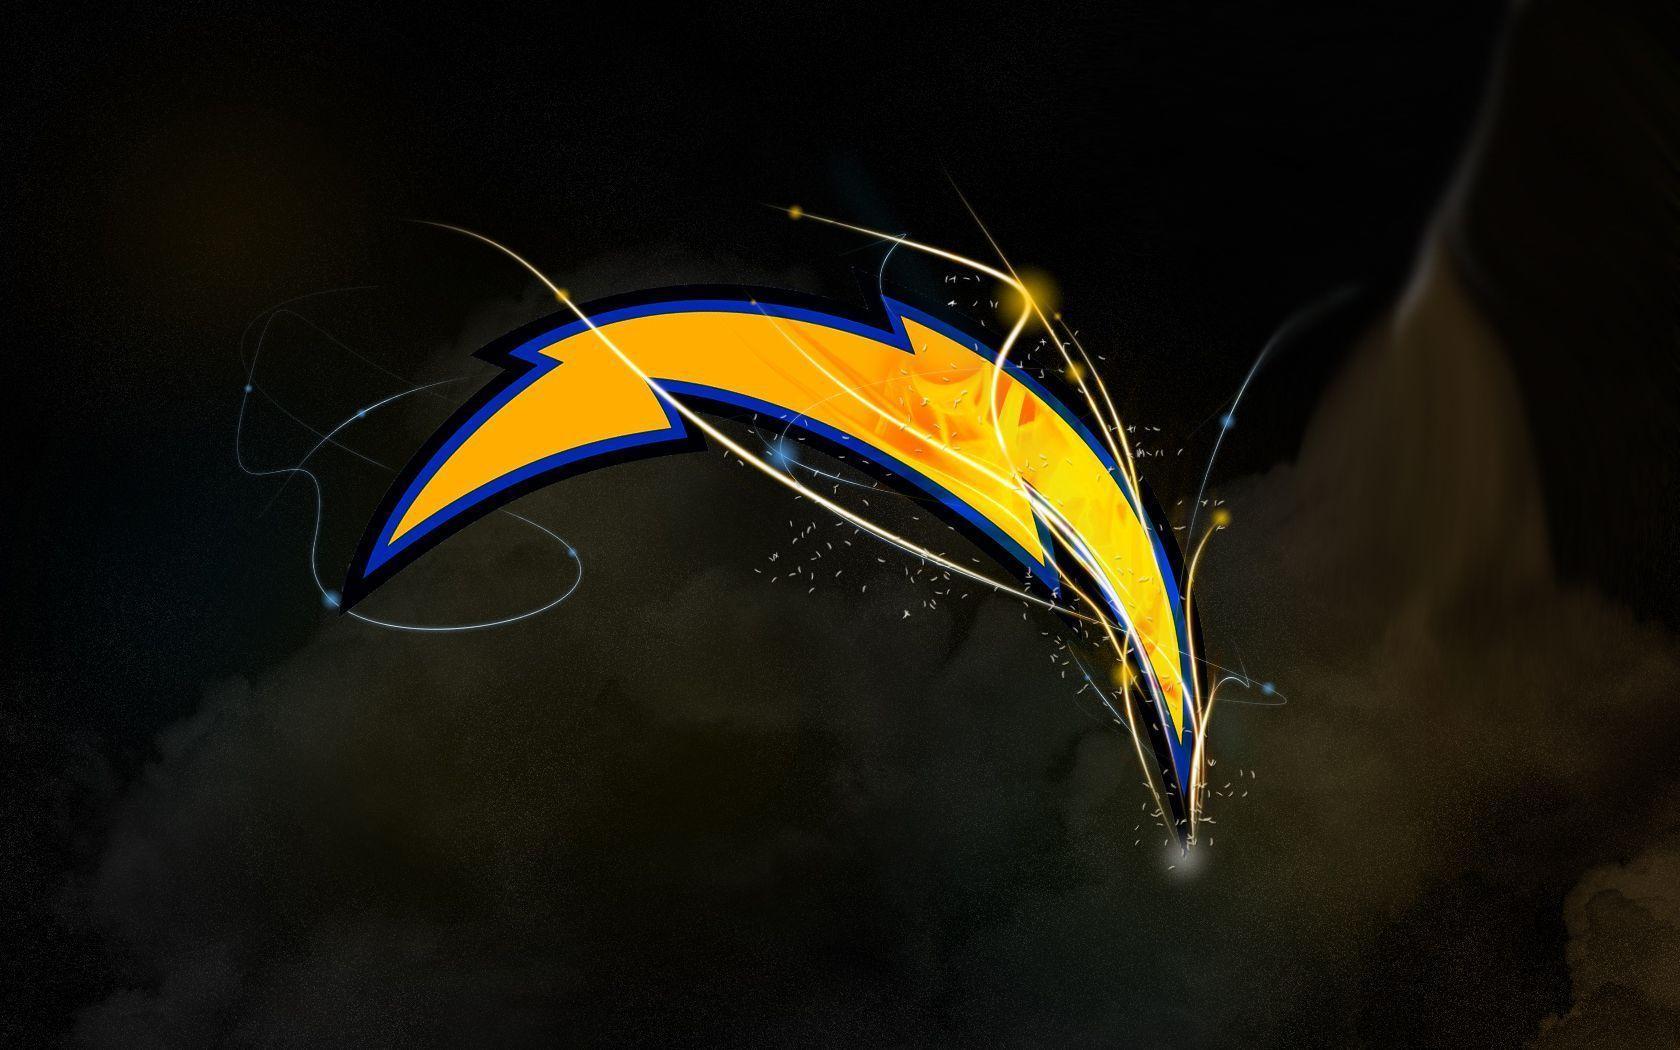 11 san diego chargers wallpapers